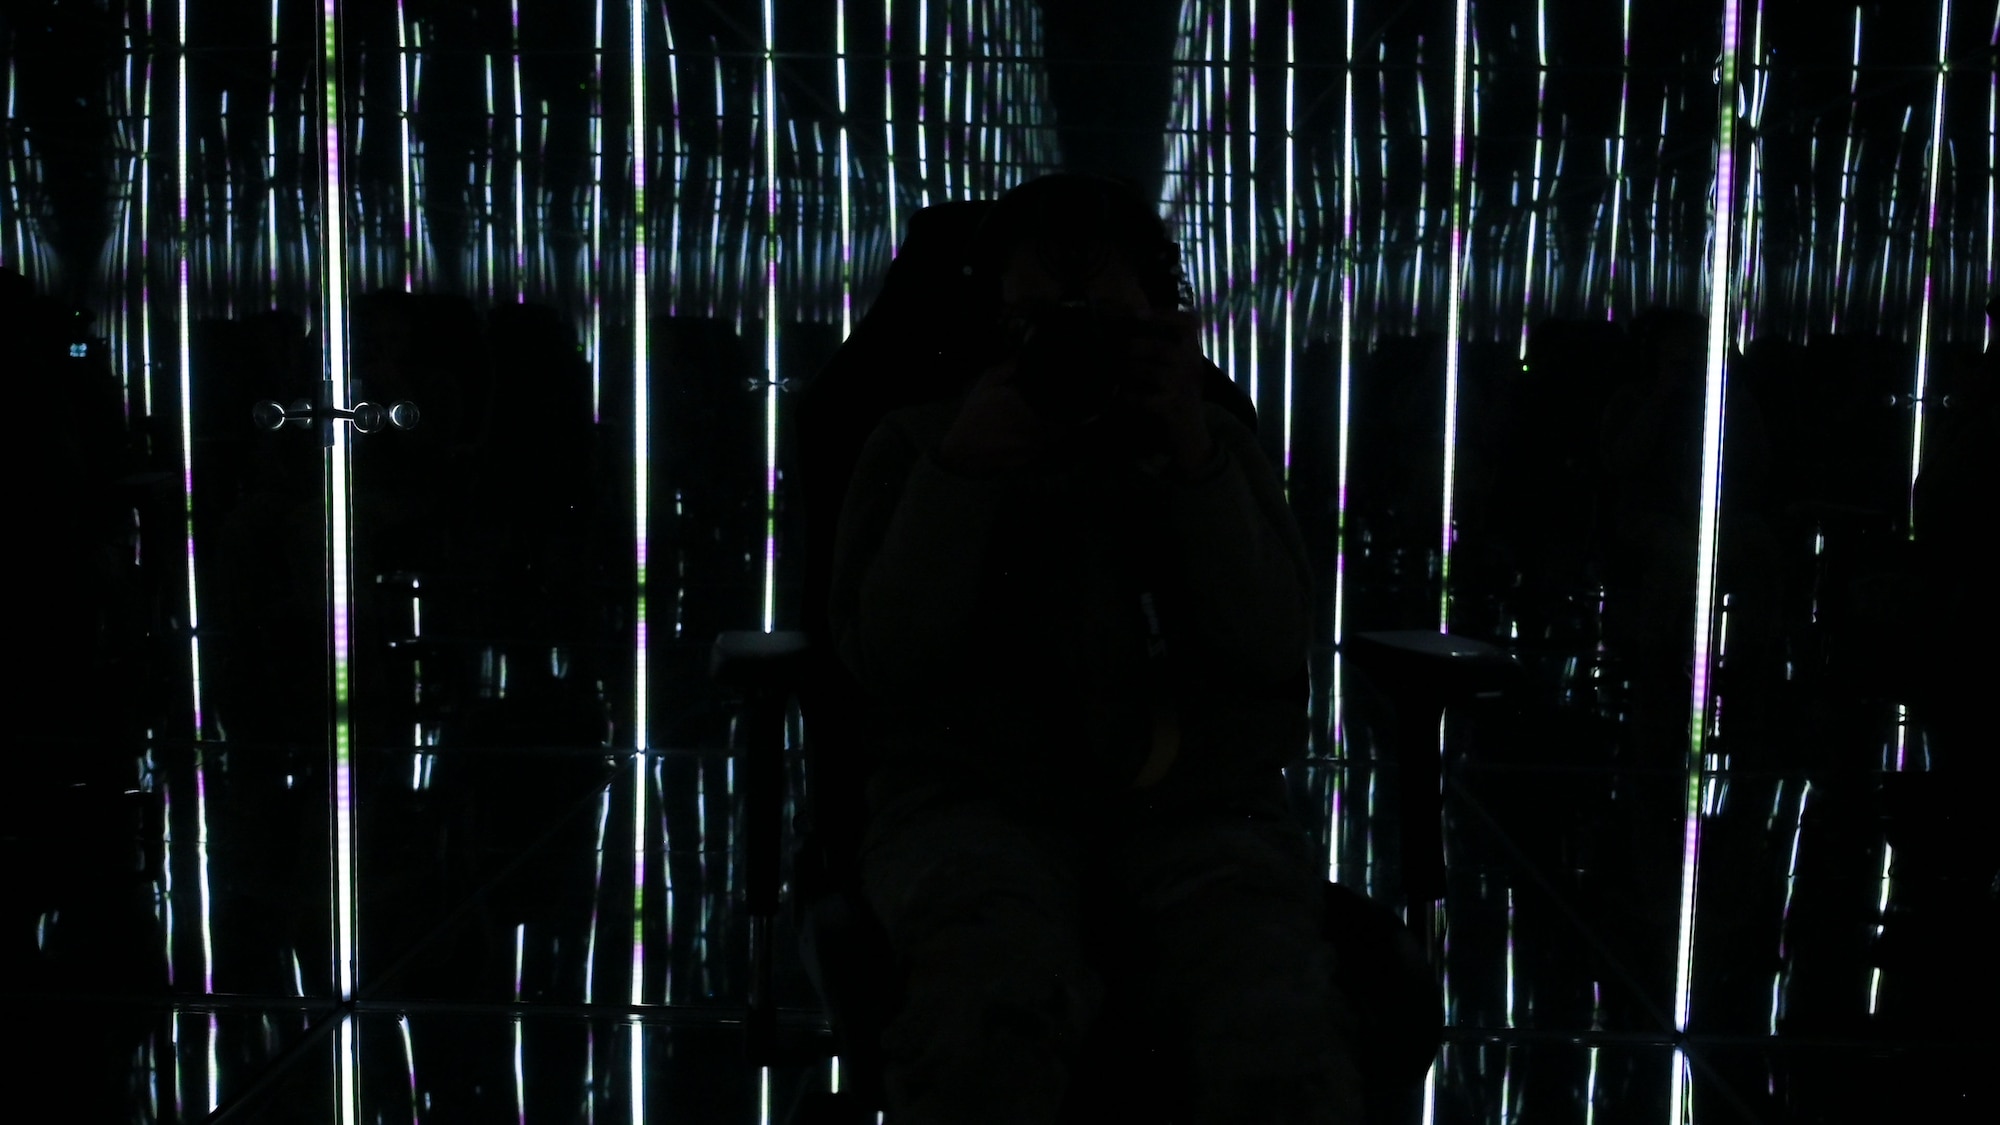 A person sits in a dark mirrored room with various lights reflecting.